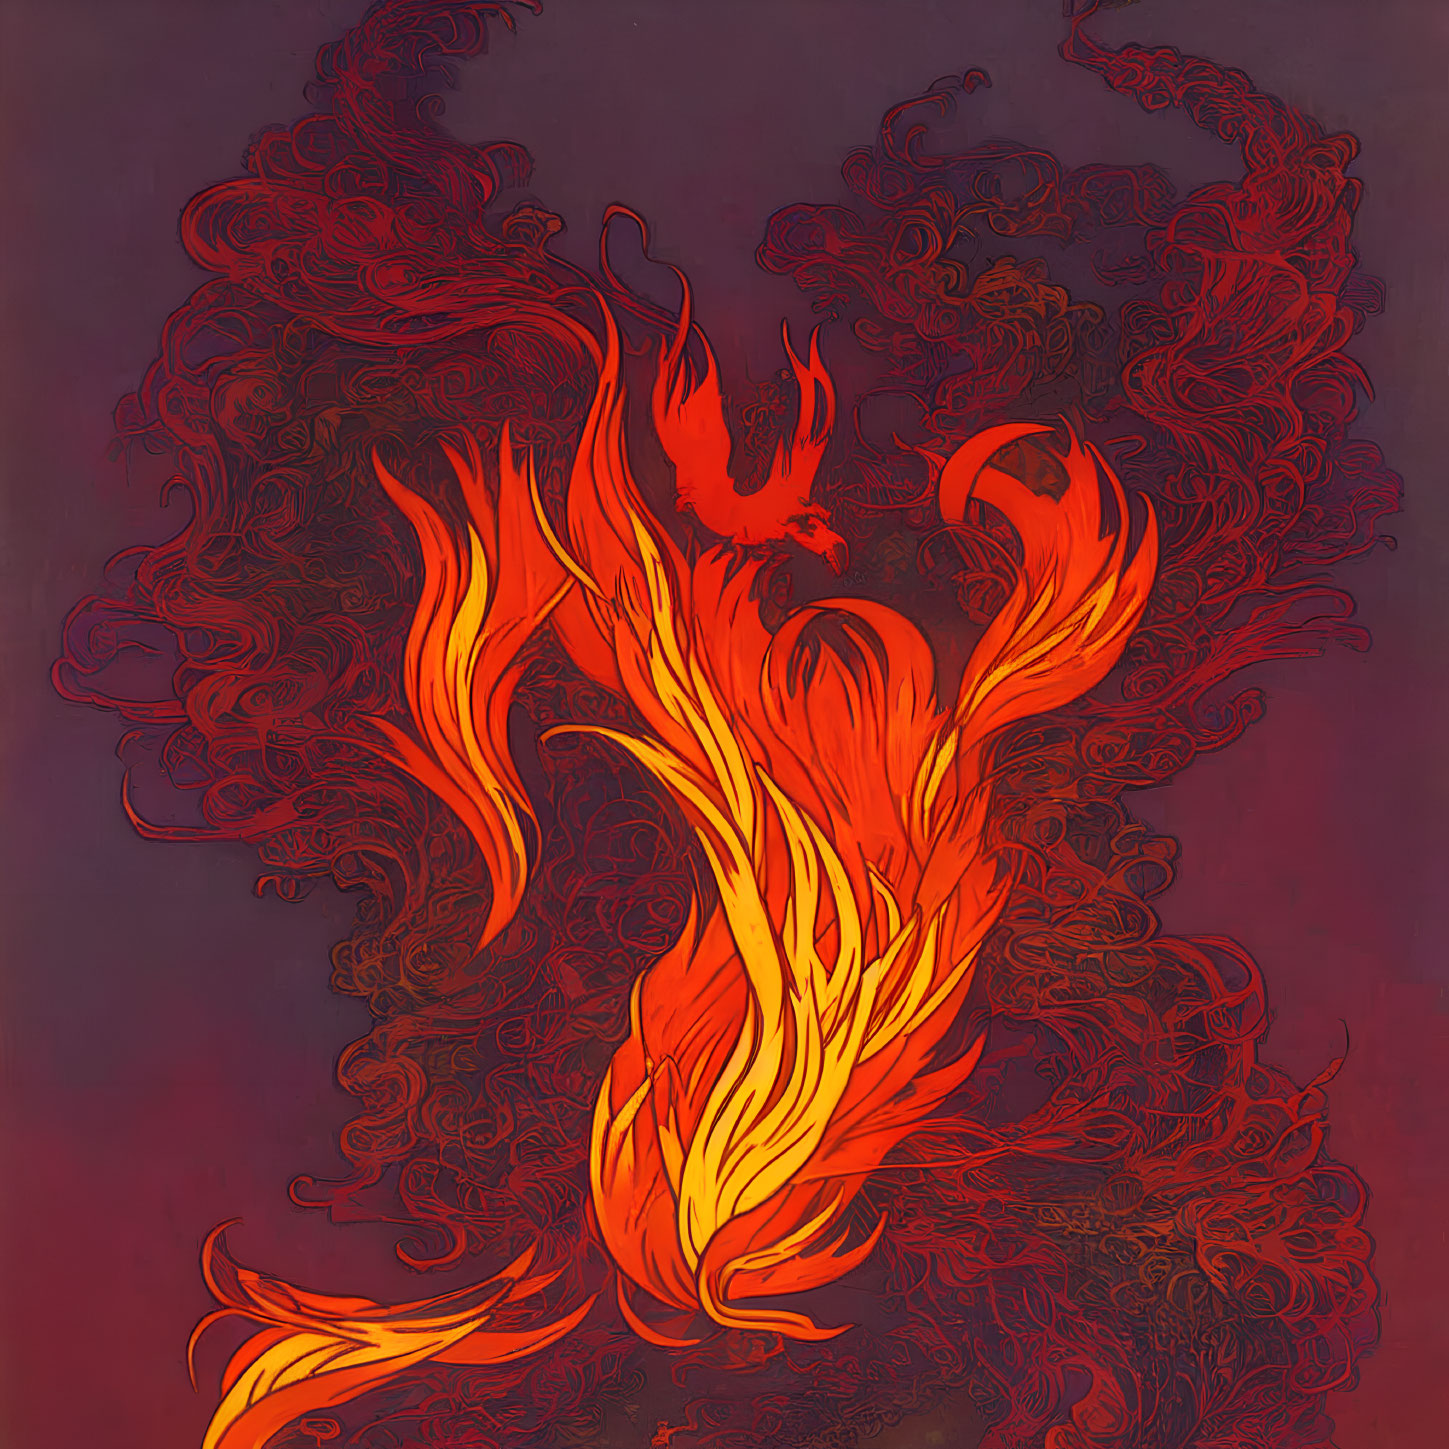 Vibrant Orange and Red Flames on Deep Red Background